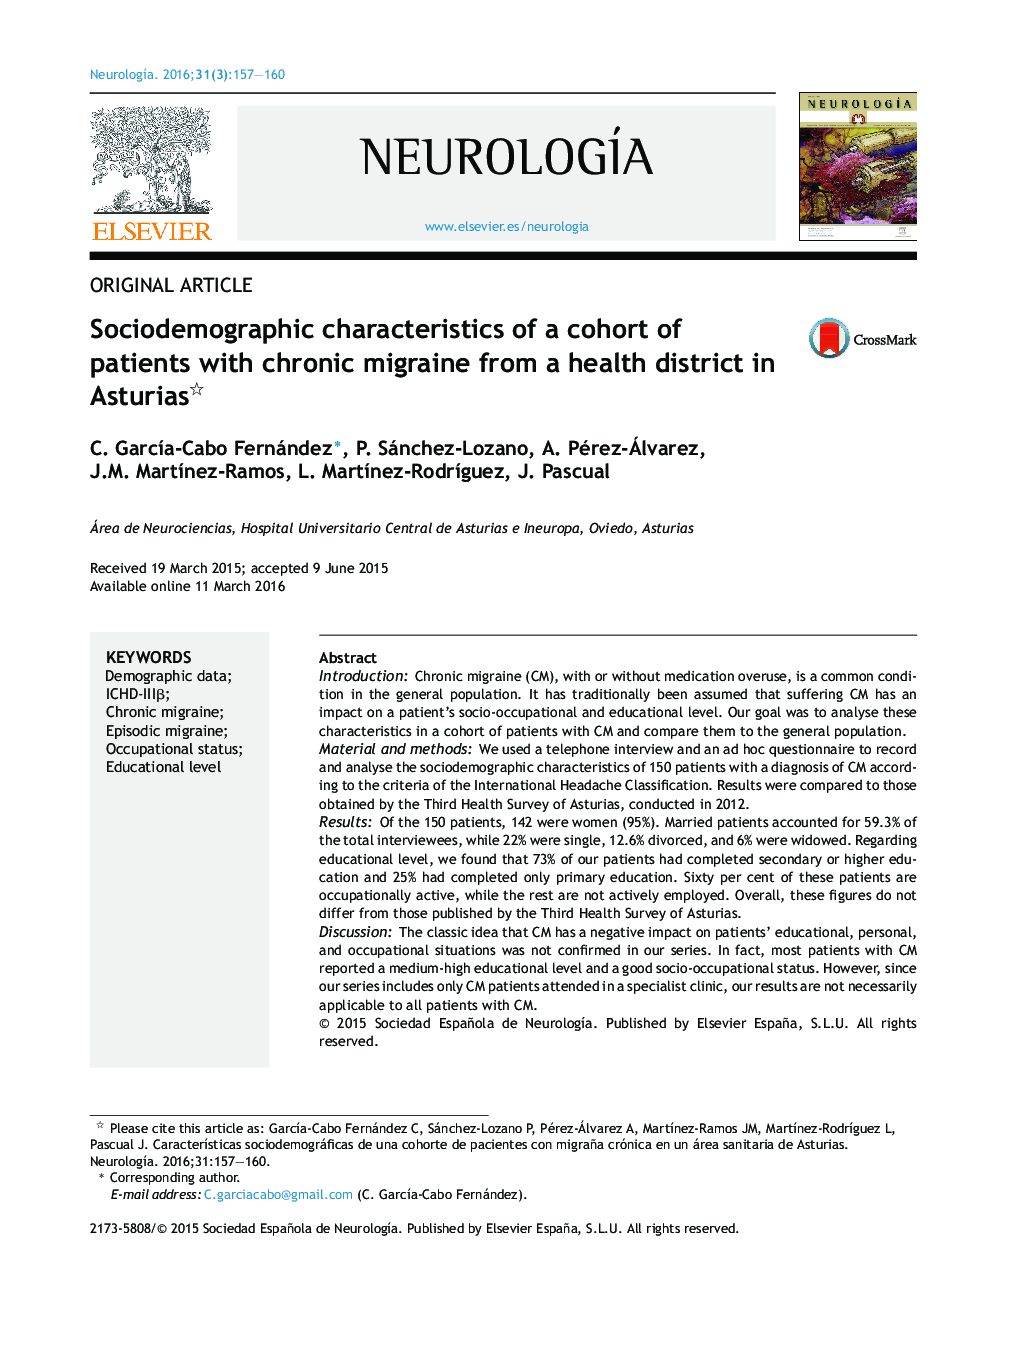 Sociodemographic characteristics of a cohort of patients with chronic migraine from a health district in Asturias